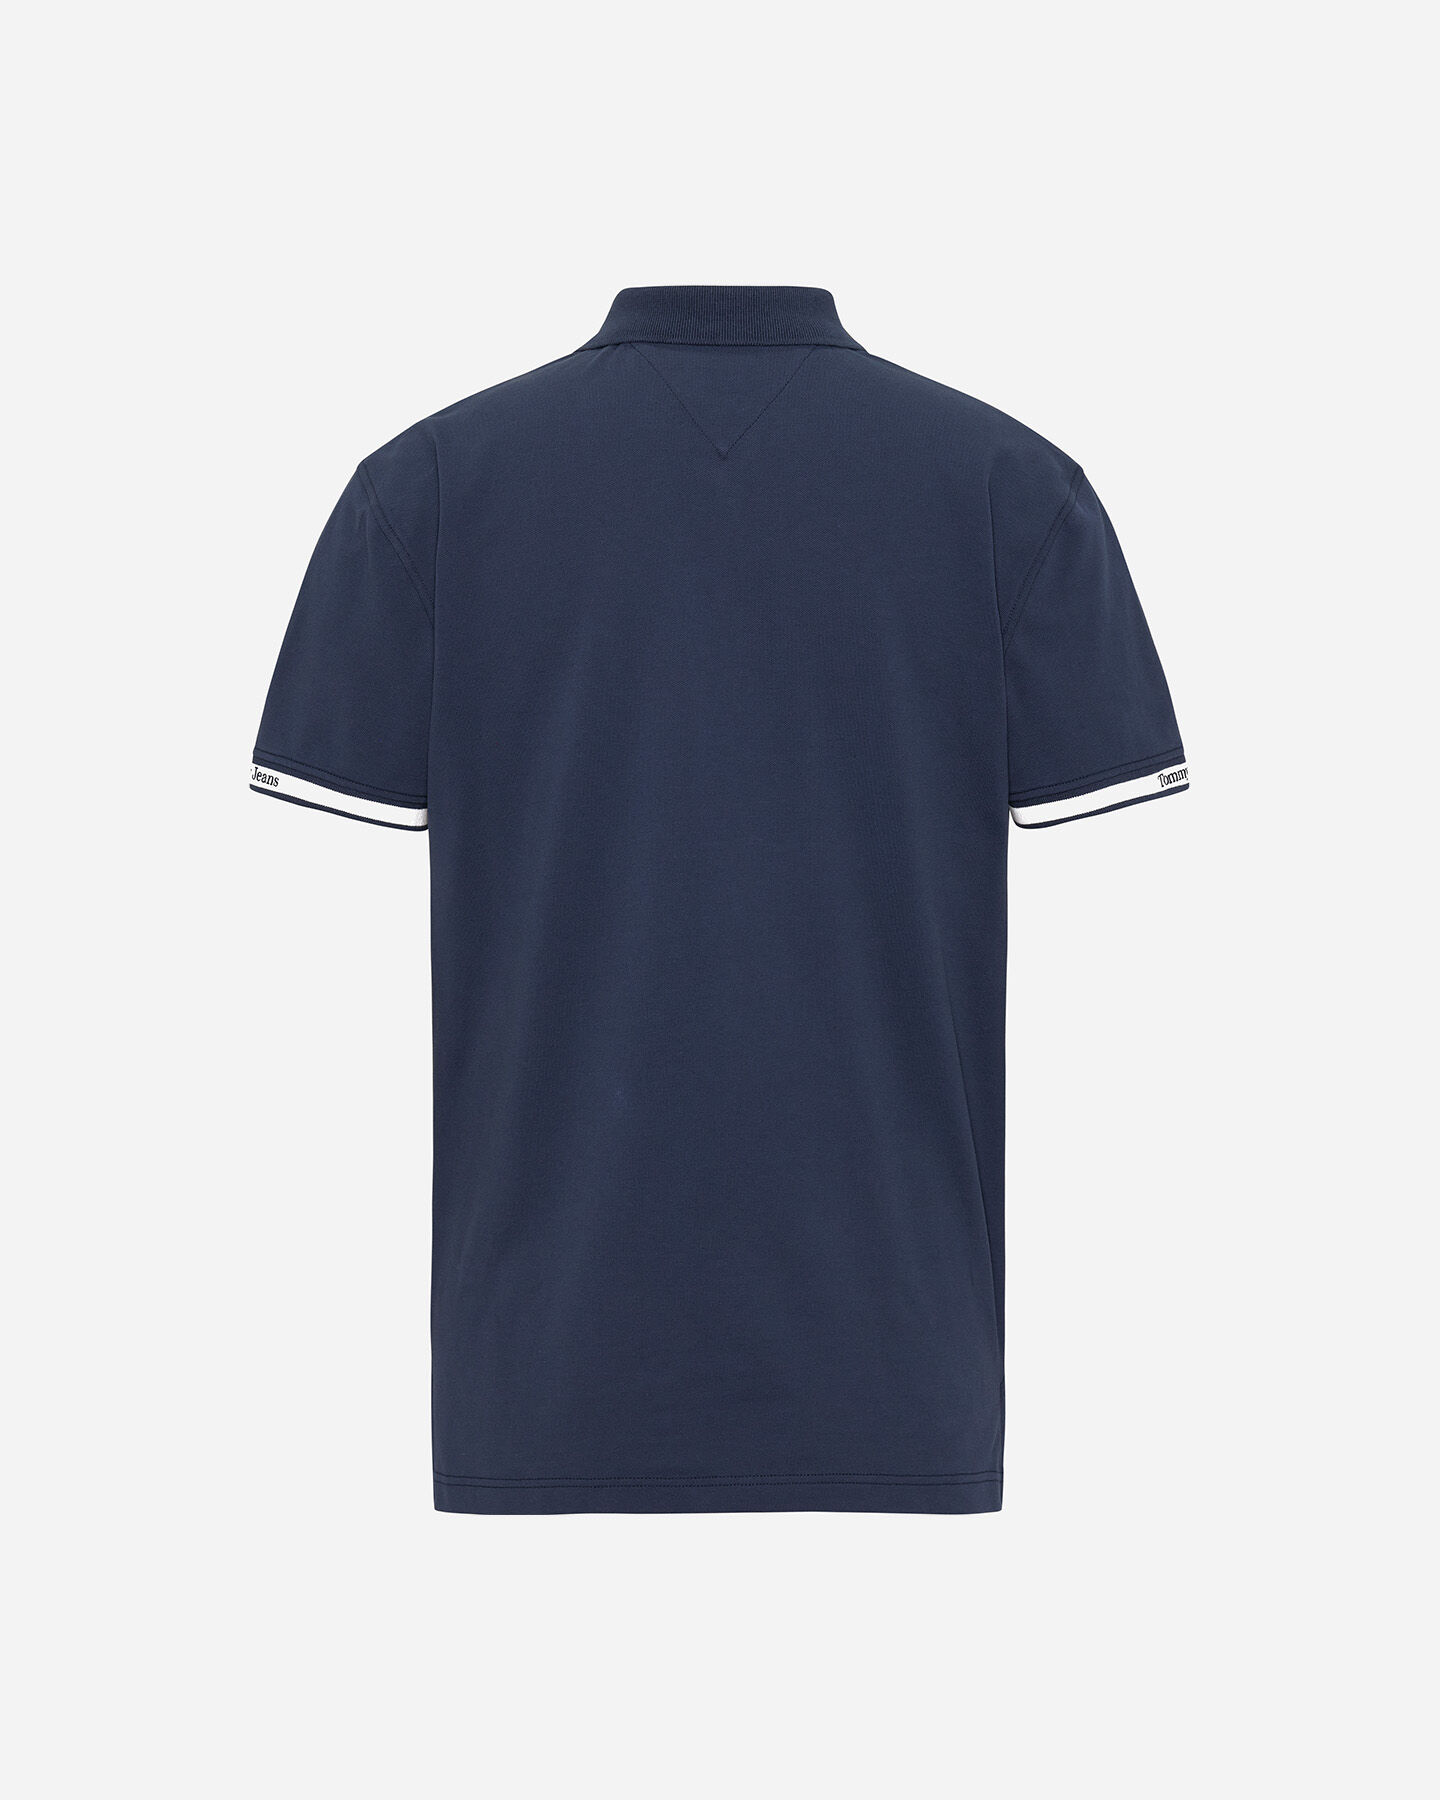  Polo TOMMY HILFIGER PIQUET STRETCH M S4122759|C87|S scatto 1